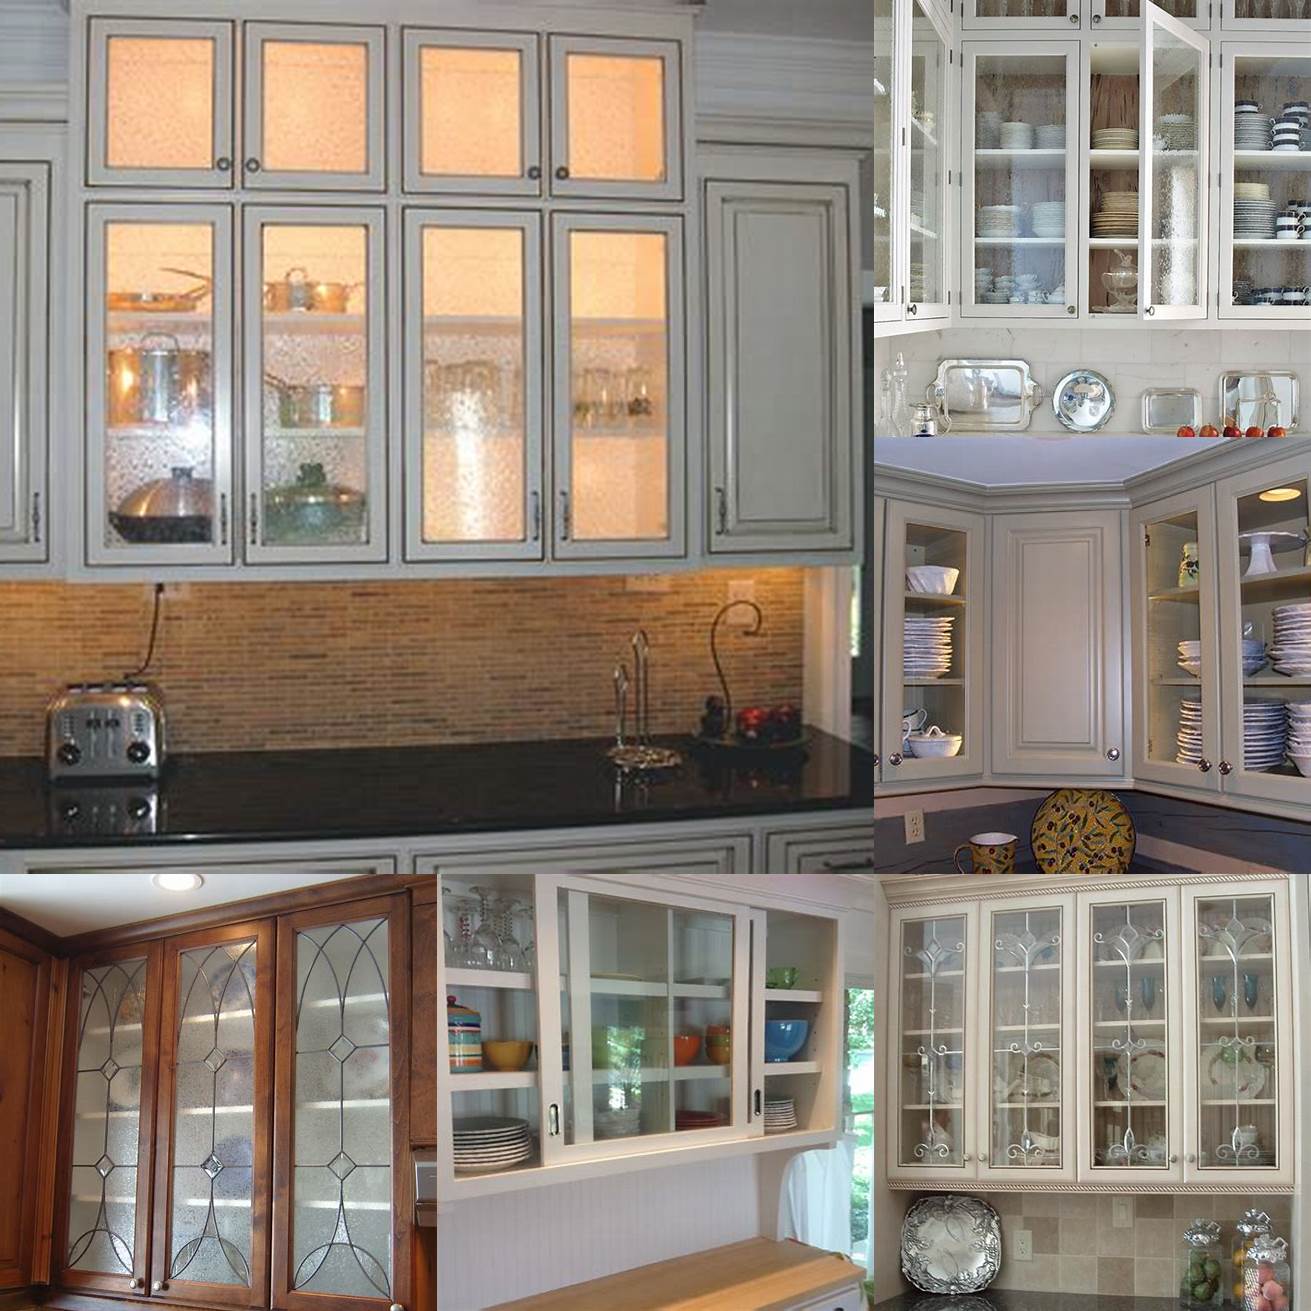 Glass cabinet doors a great way to showcase your favorite dishes